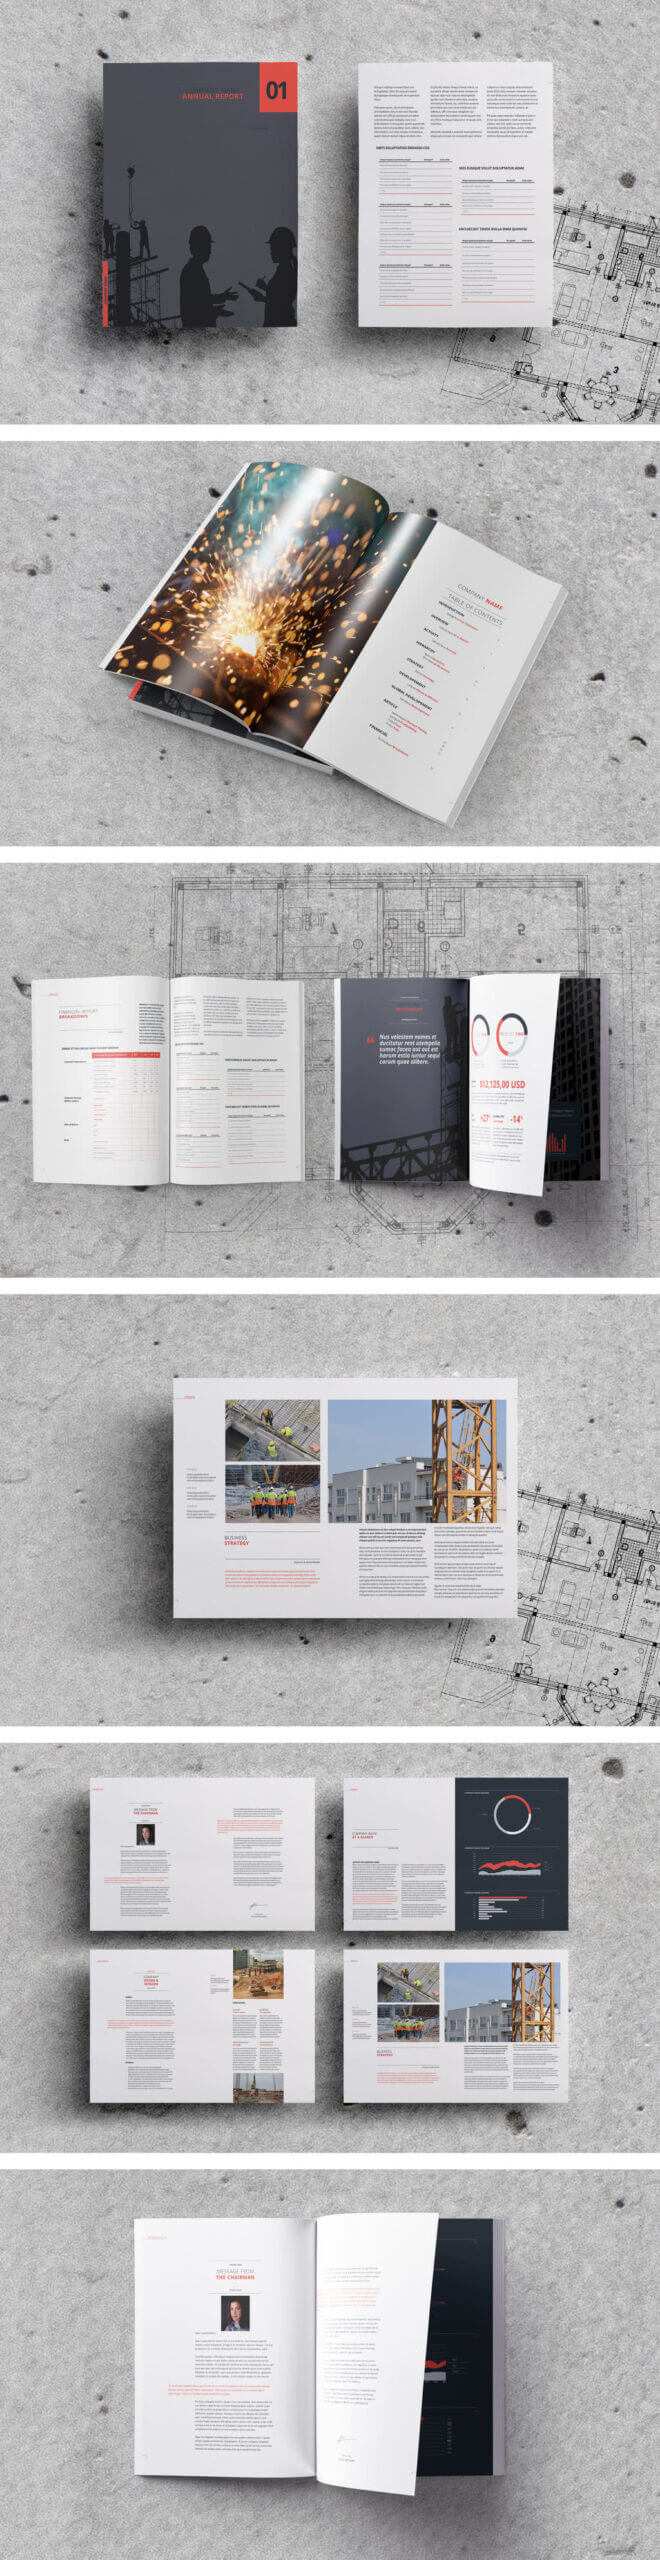 75 Fresh Indesign Templates And Where To Find More In Free Annual Report Template Indesign